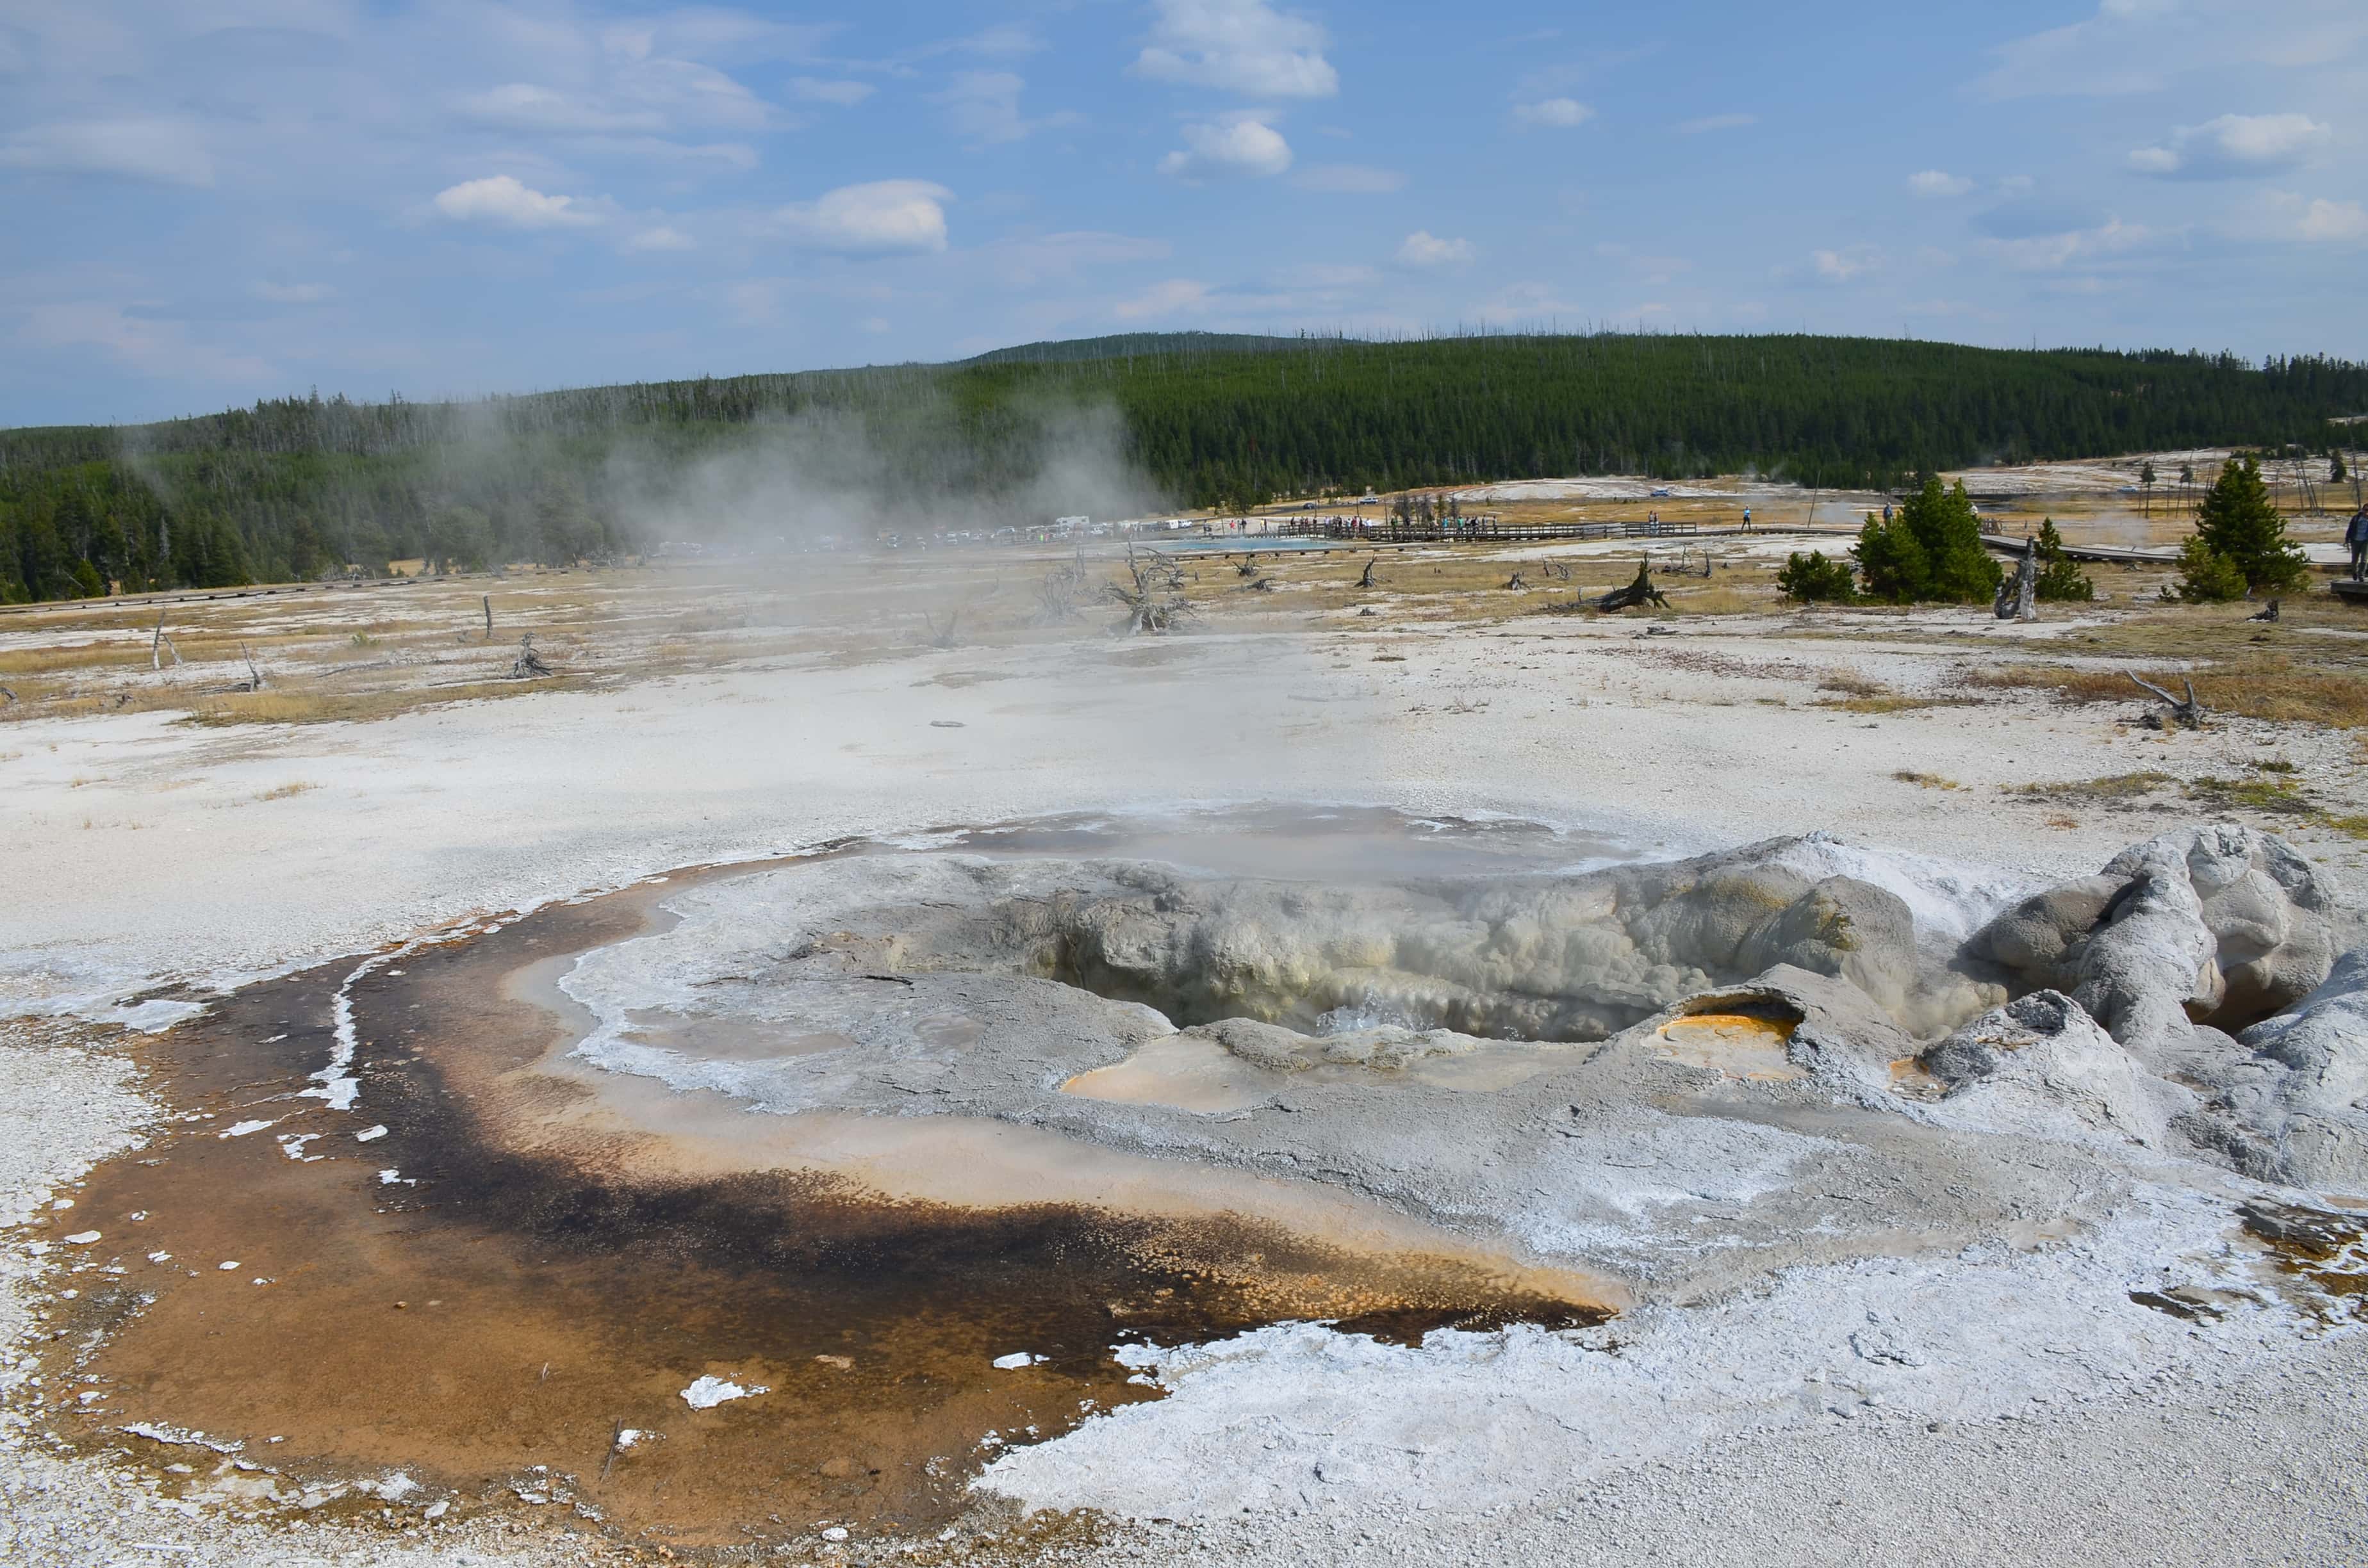 Avoca Spring at Biscuit Basin at the Upper Geyser Basin at Yellowstone National Park, Wyoming